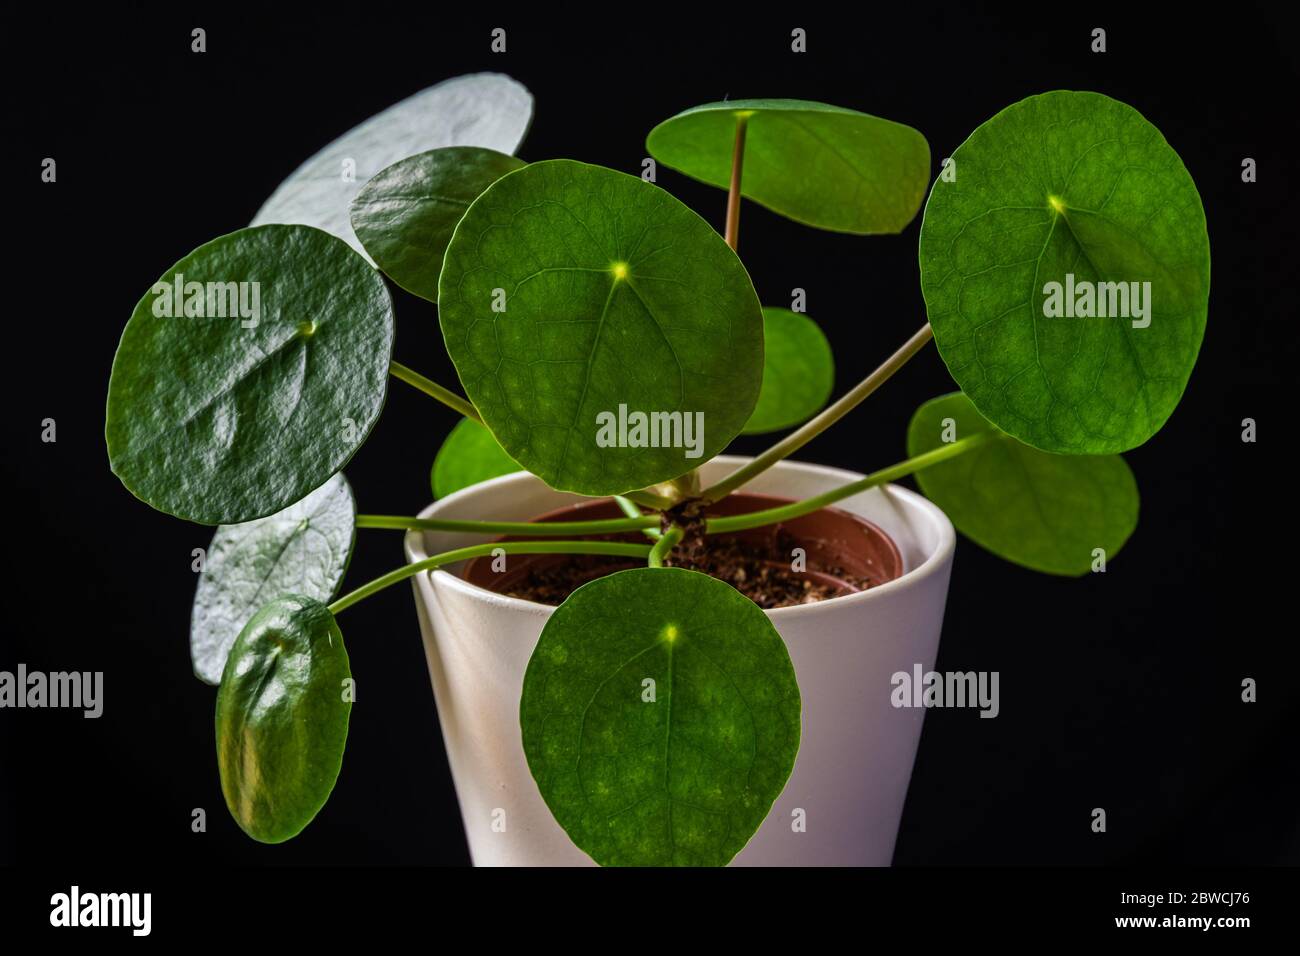 Chinese money plant (pilea peperomioides) forming attractive green rosettes. Striking houseplant on a dark background. Stock Photo